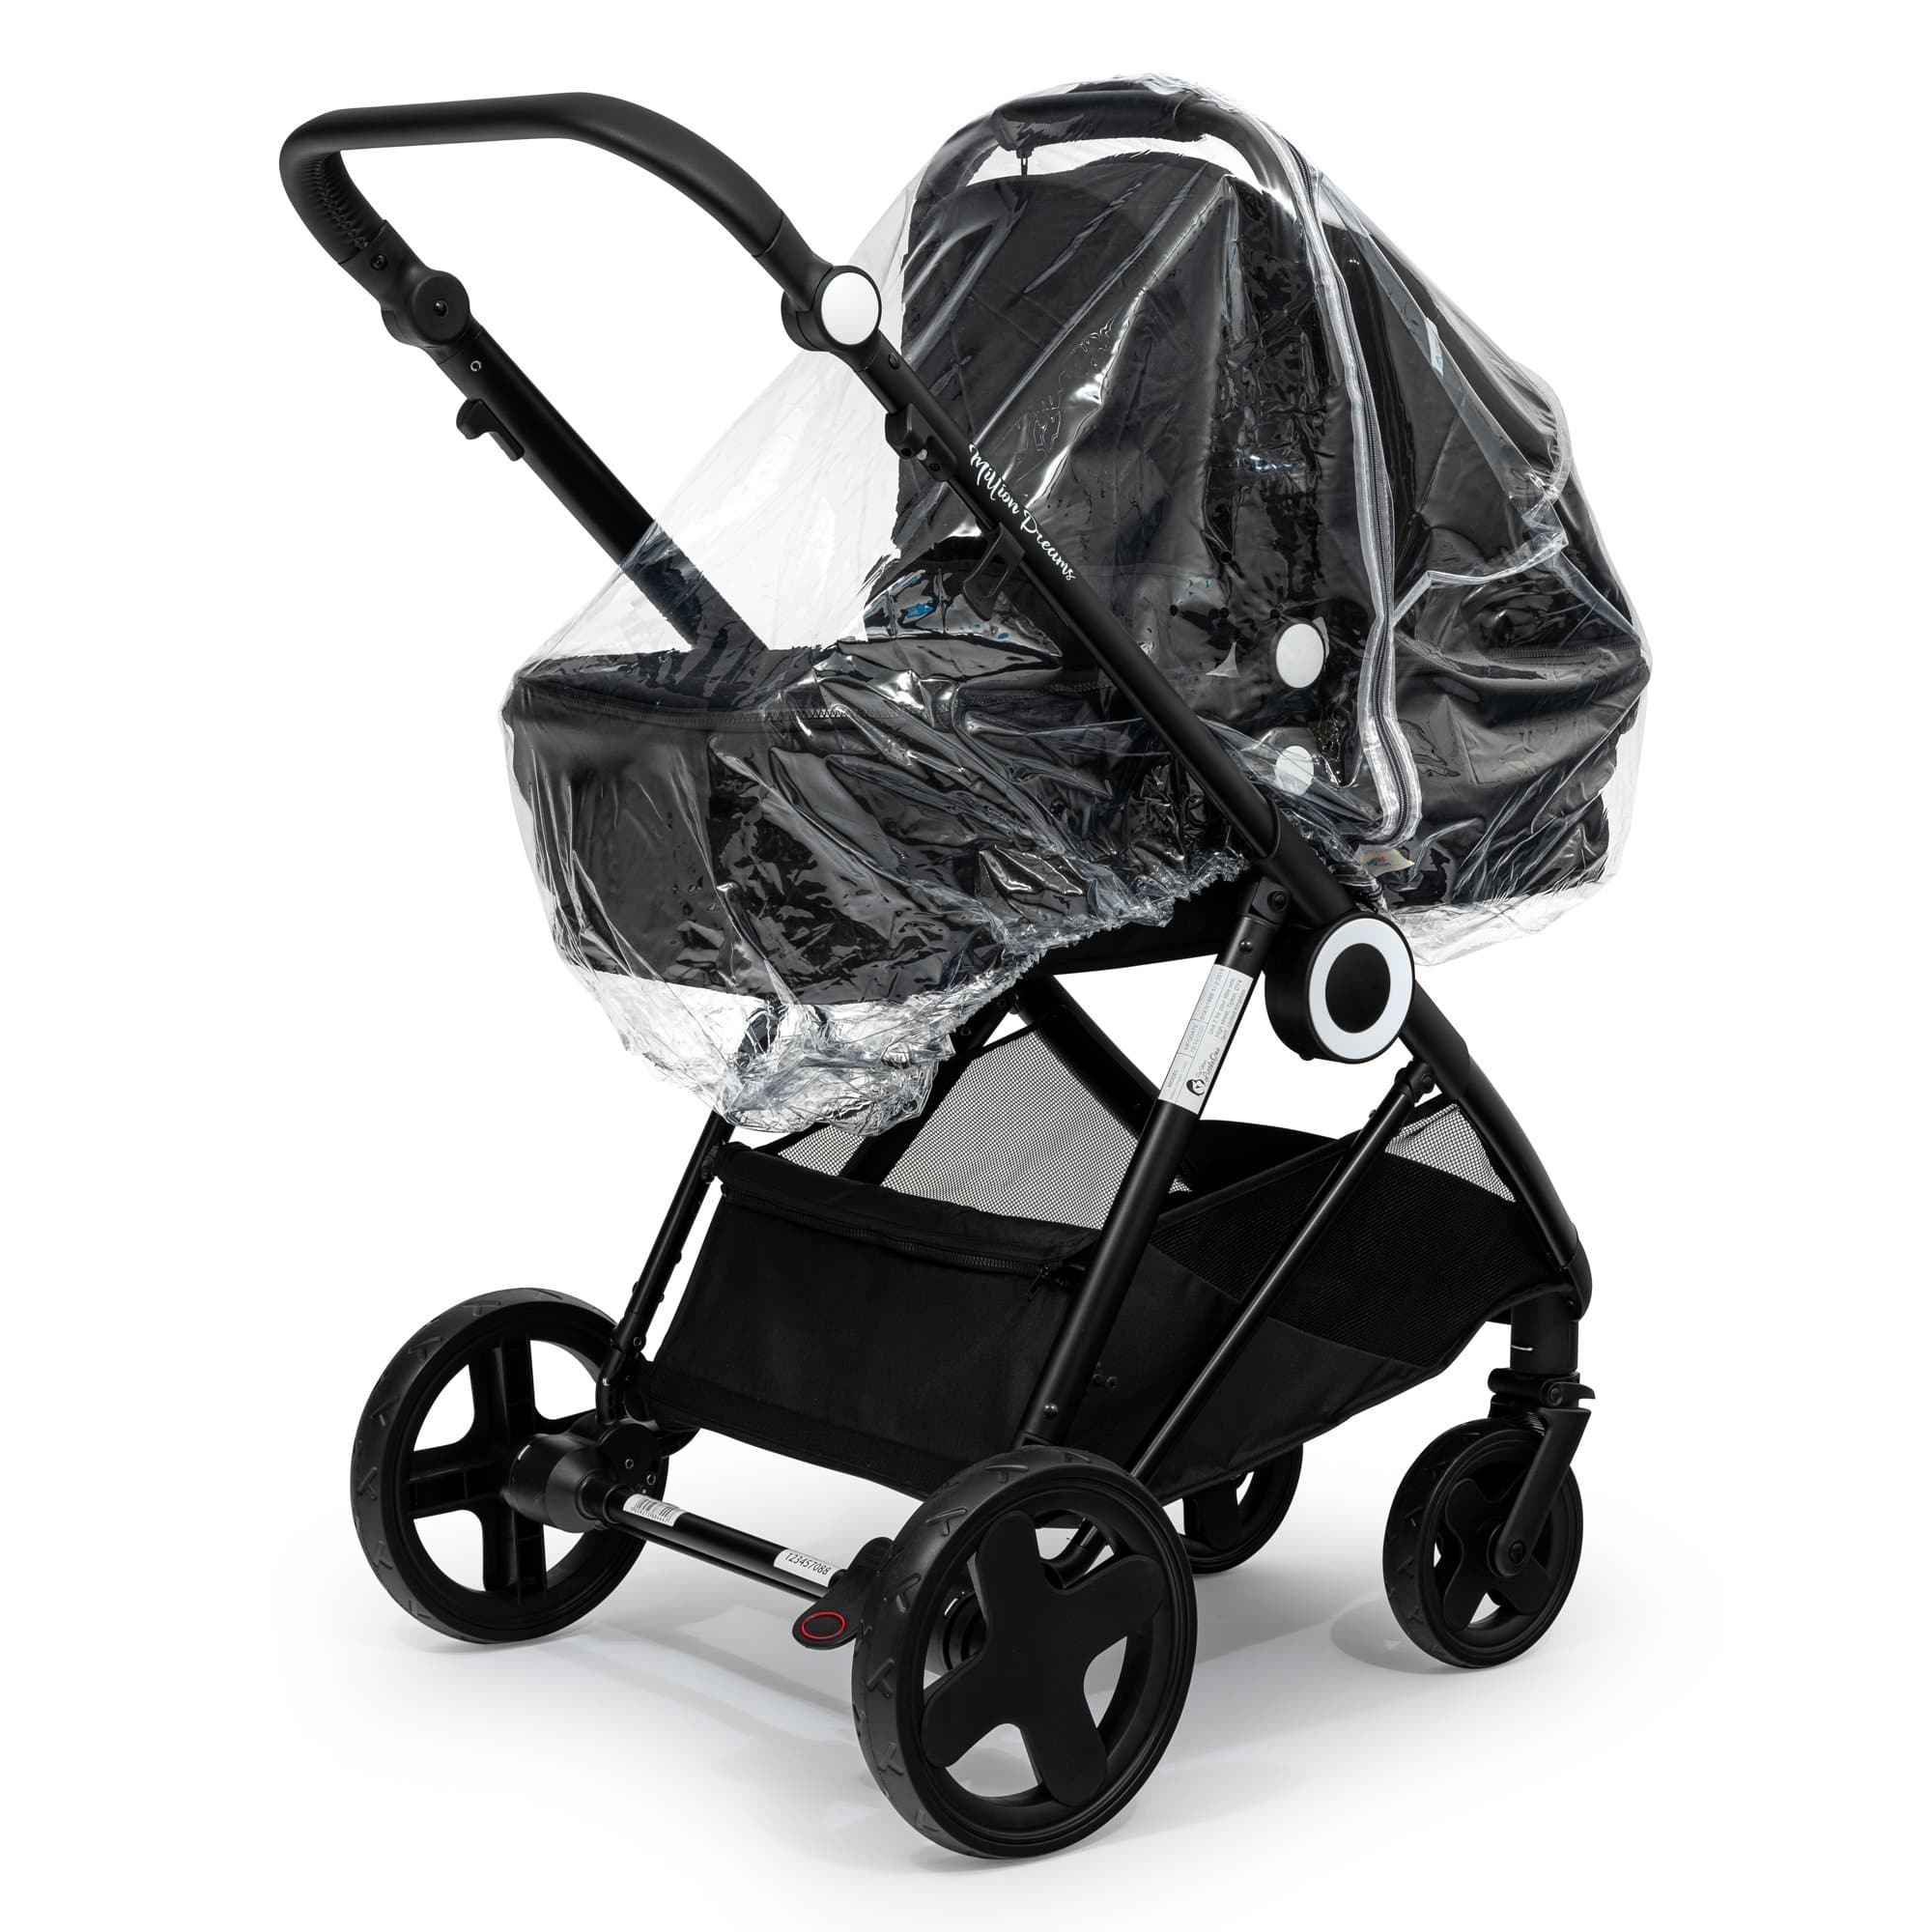 2 in 1 Rain Cover Compatible with Mee-Go - Fits All Models - For Your Little One